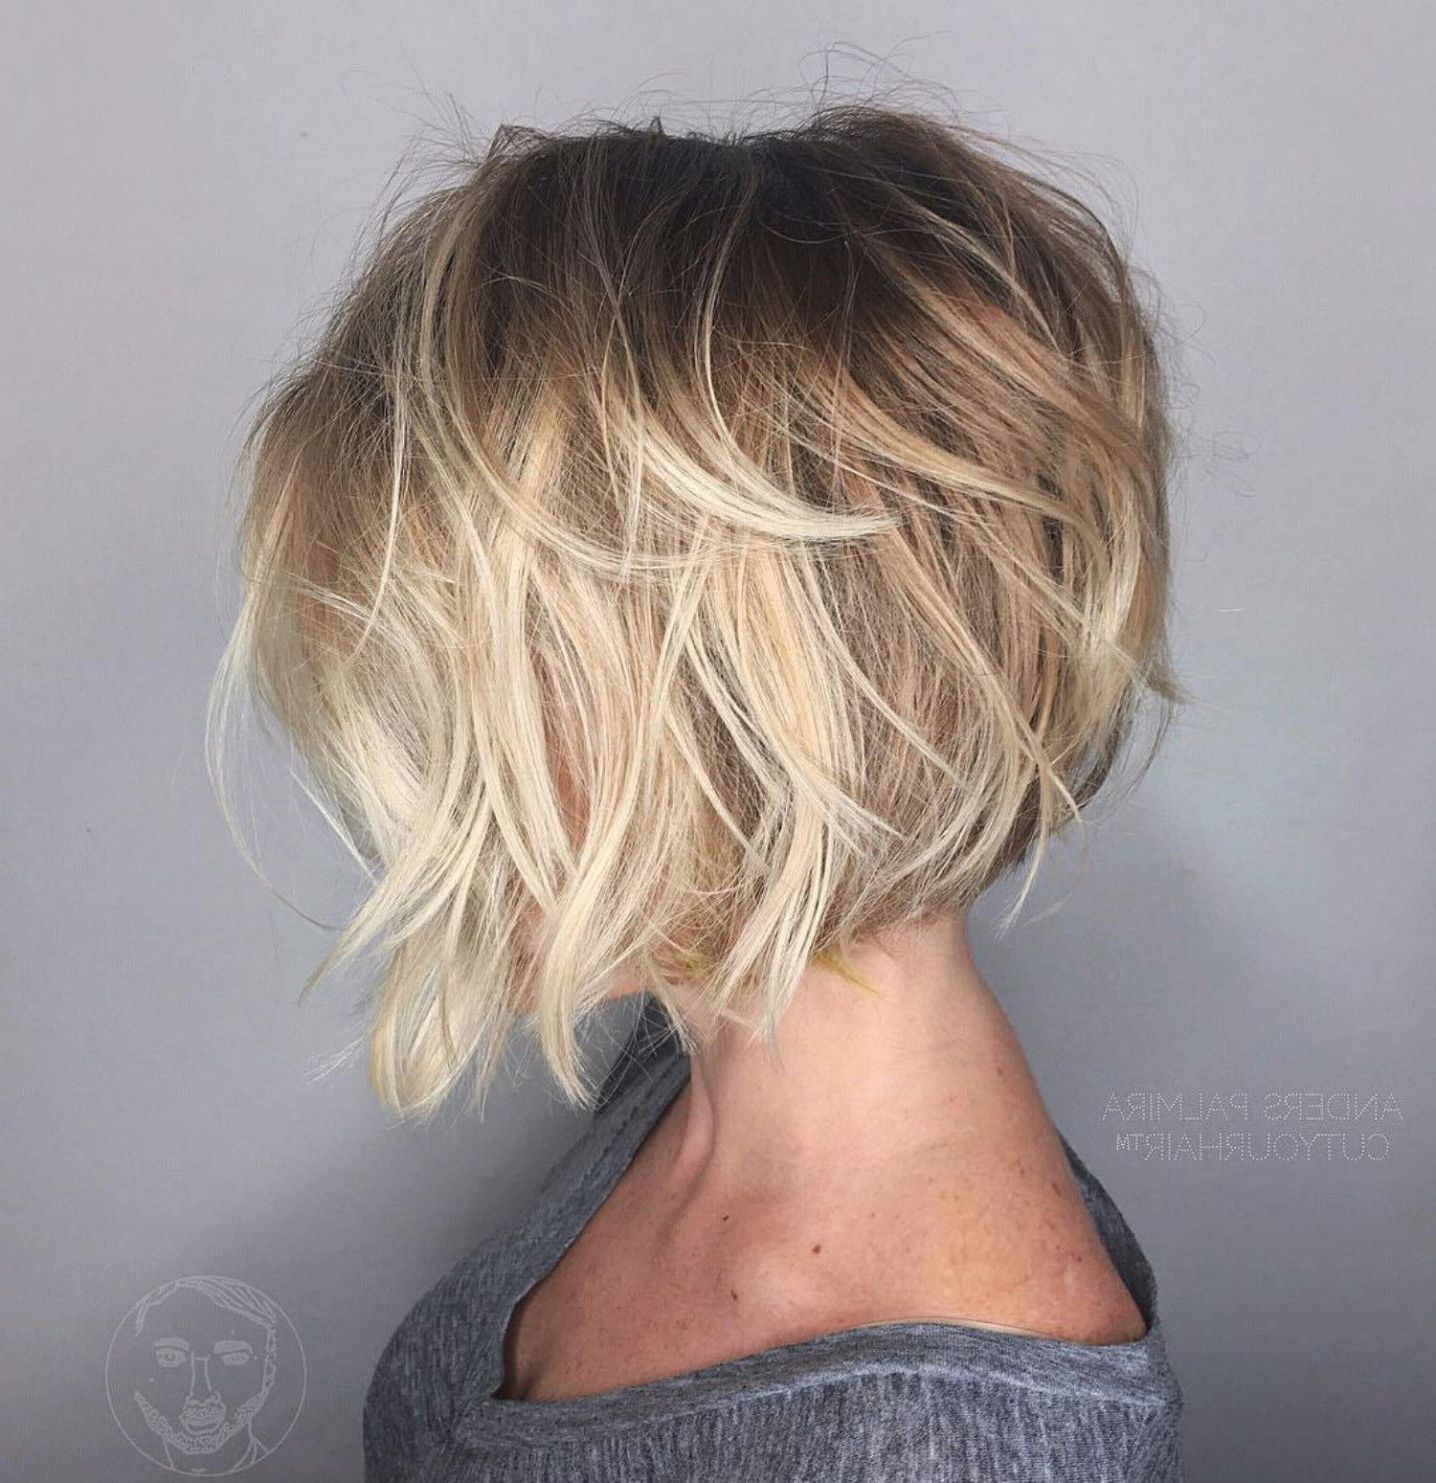 100 Mind Blowing Short Hairstyles For Fine Hair In 2018 | My Style Pertaining To Silver Balayage Bob Haircuts With Swoopy Layers (View 6 of 20)